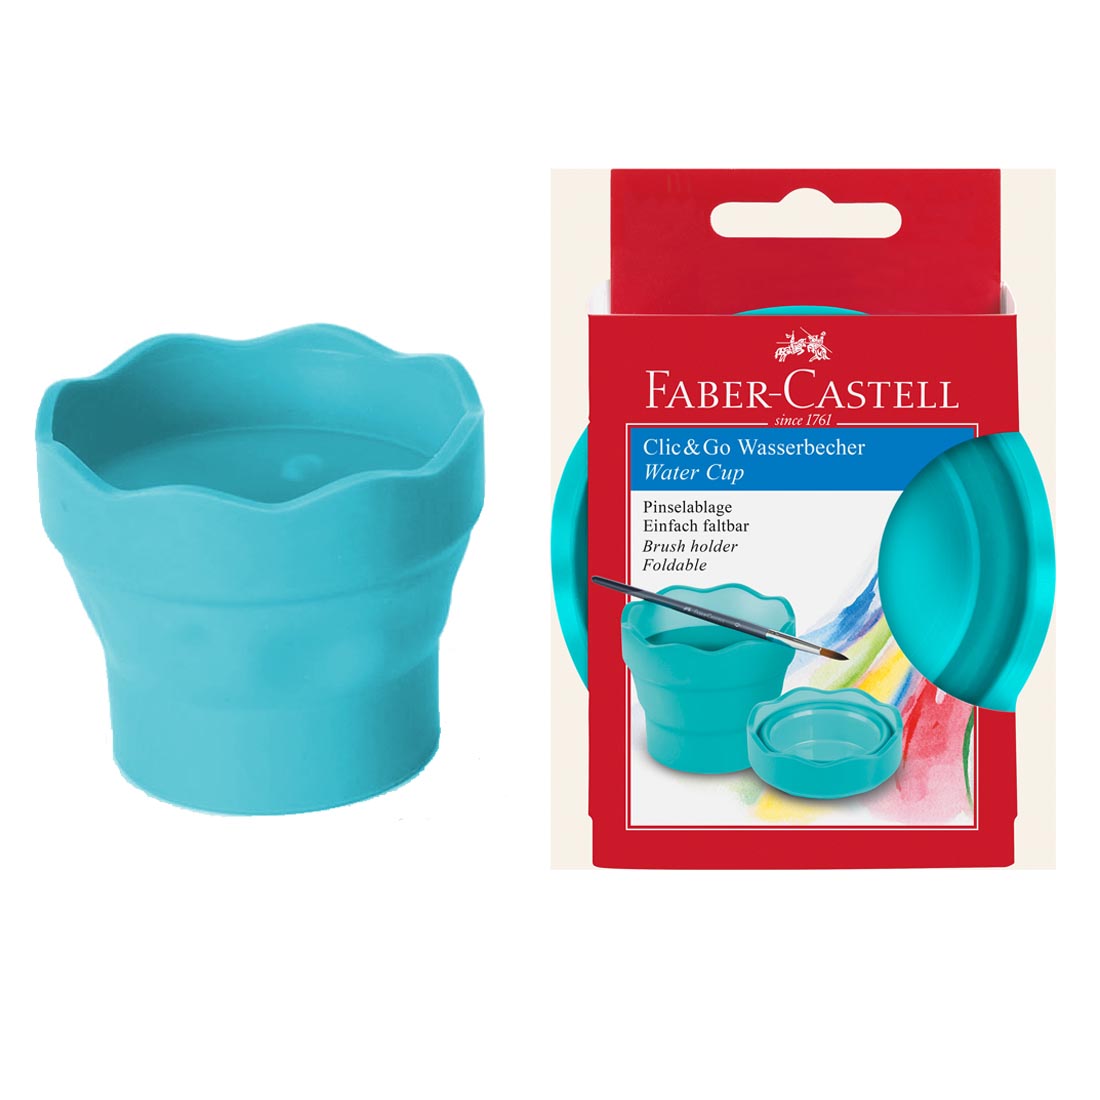 Clic & Go Collapsible Water Pot by Faber-Castell shown inside and outside of packaging